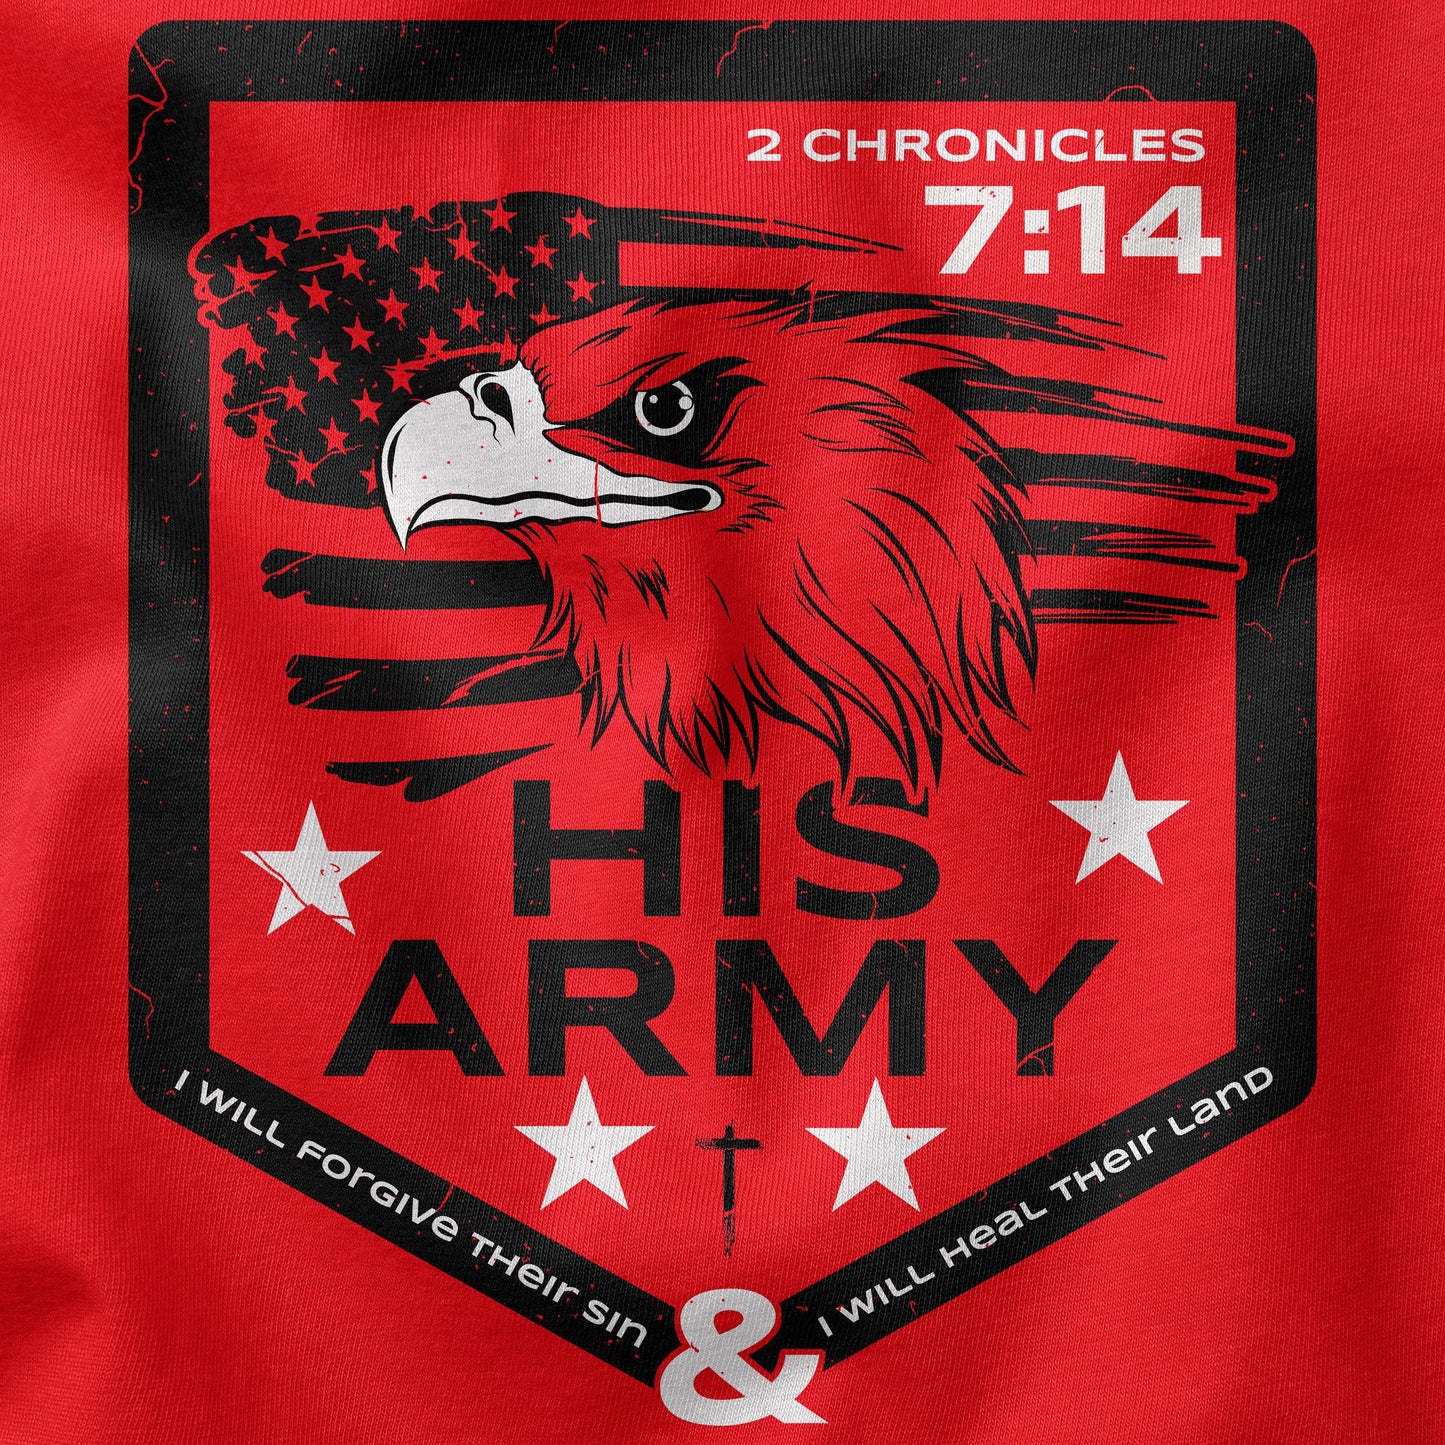 Closeup of 2 Chronicles 7:14 design from His Army® brand